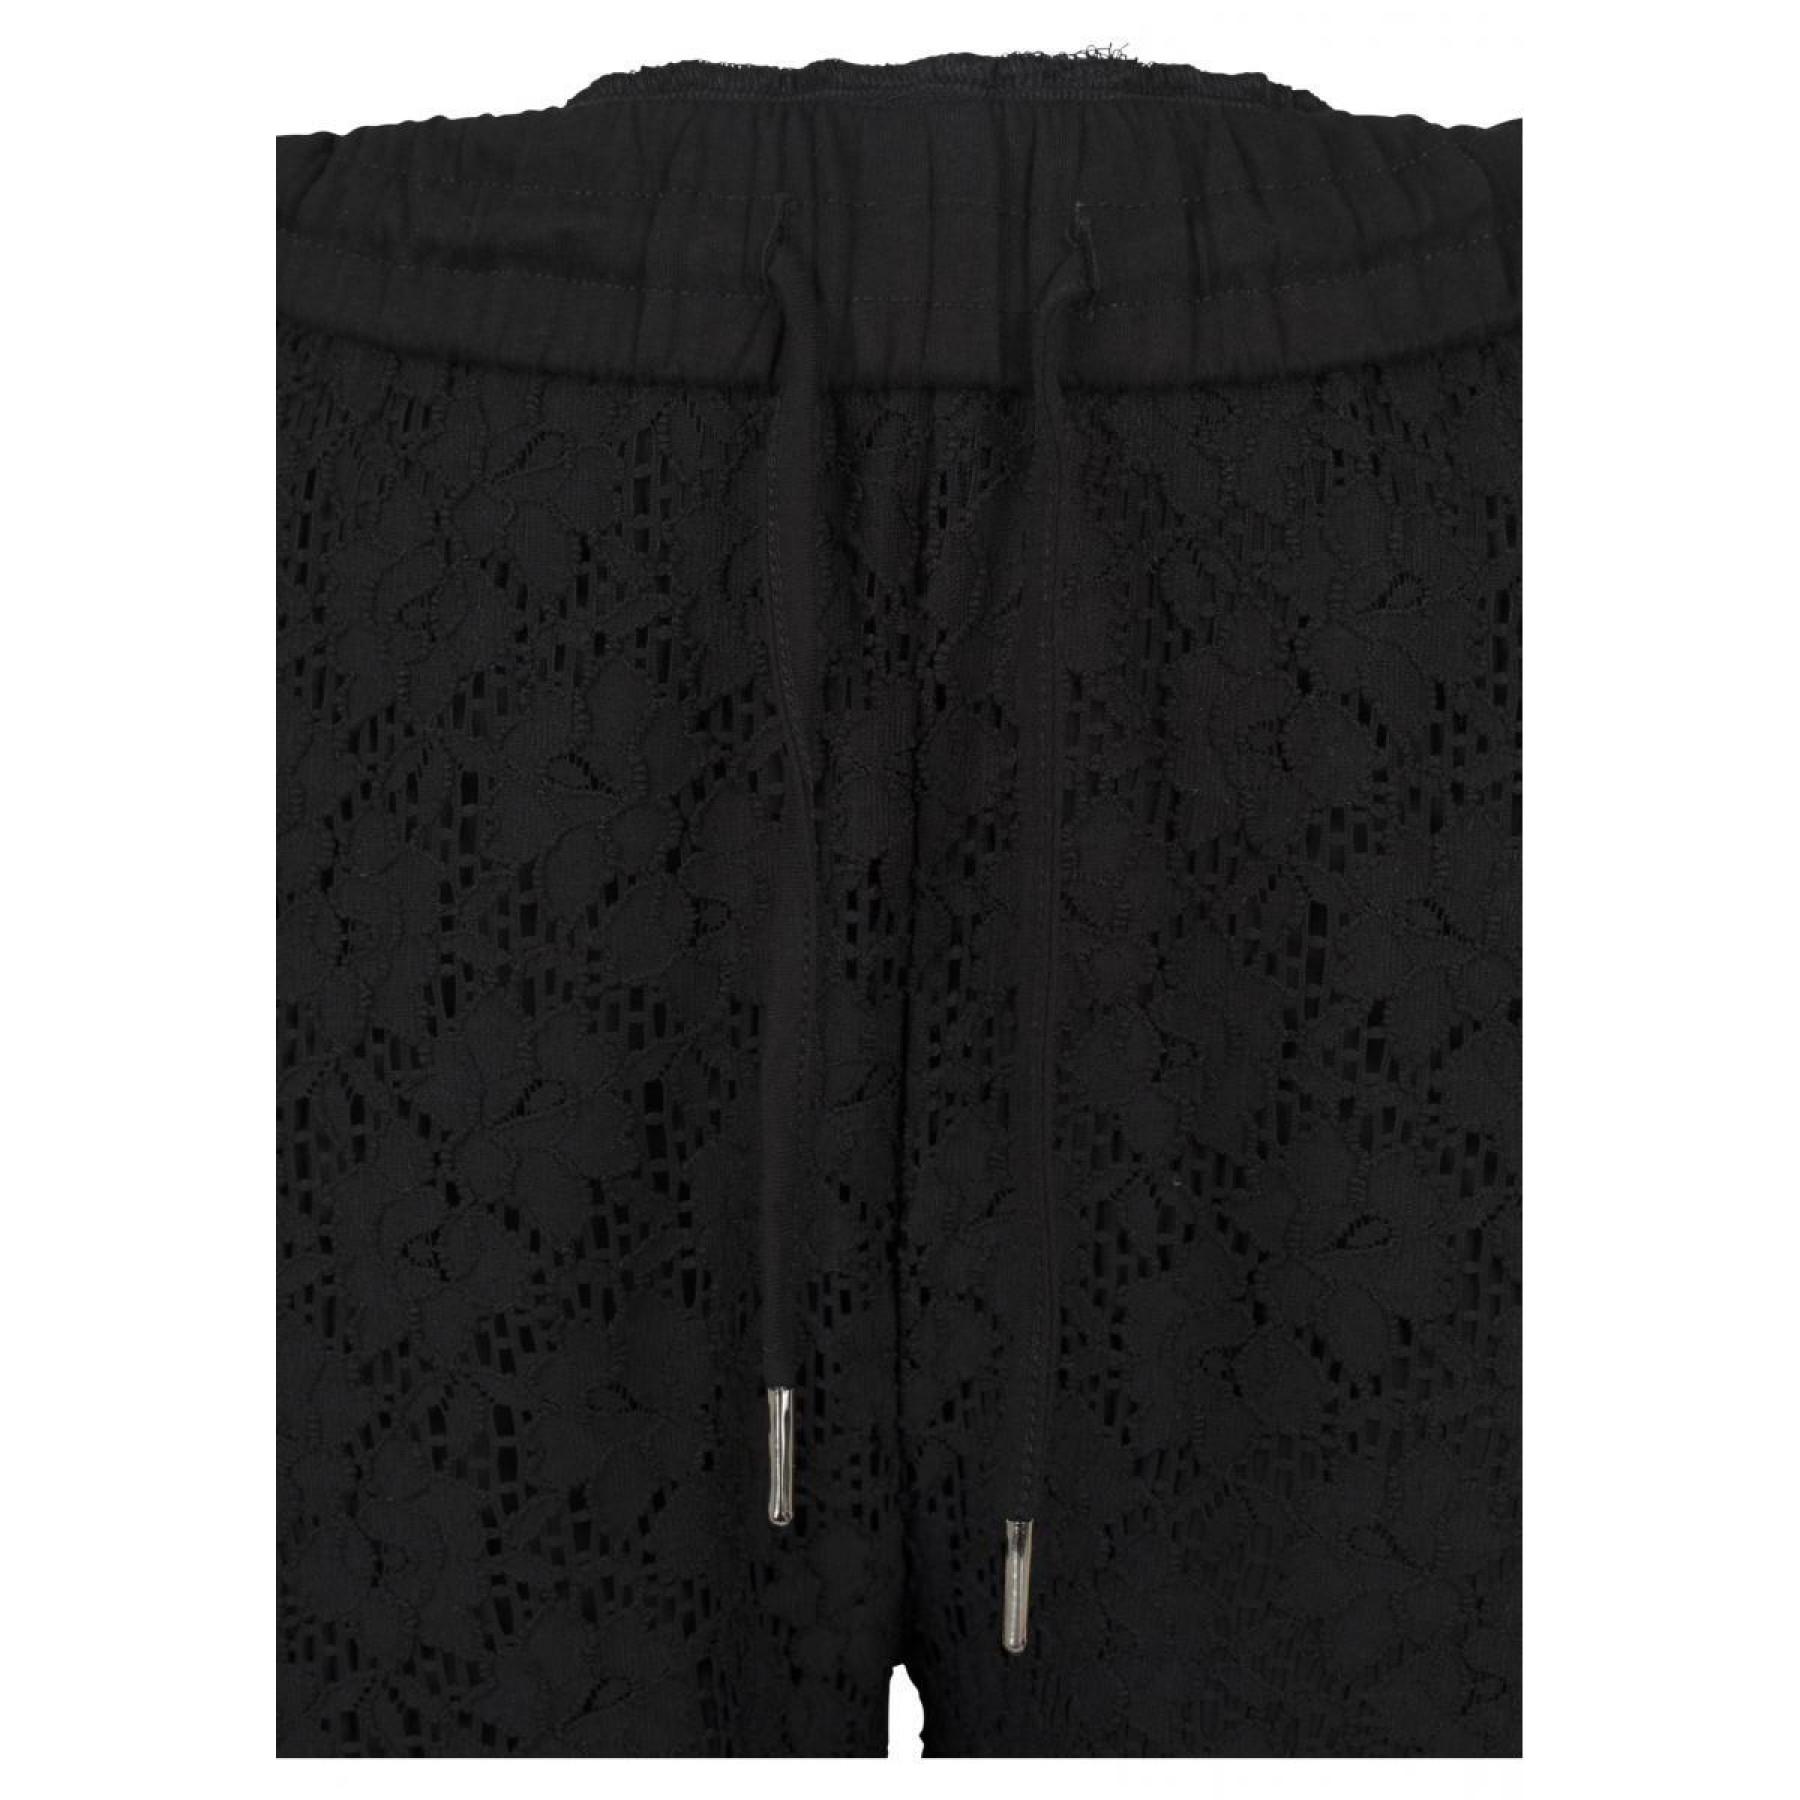 Trousers woman Urban Classic panties laces